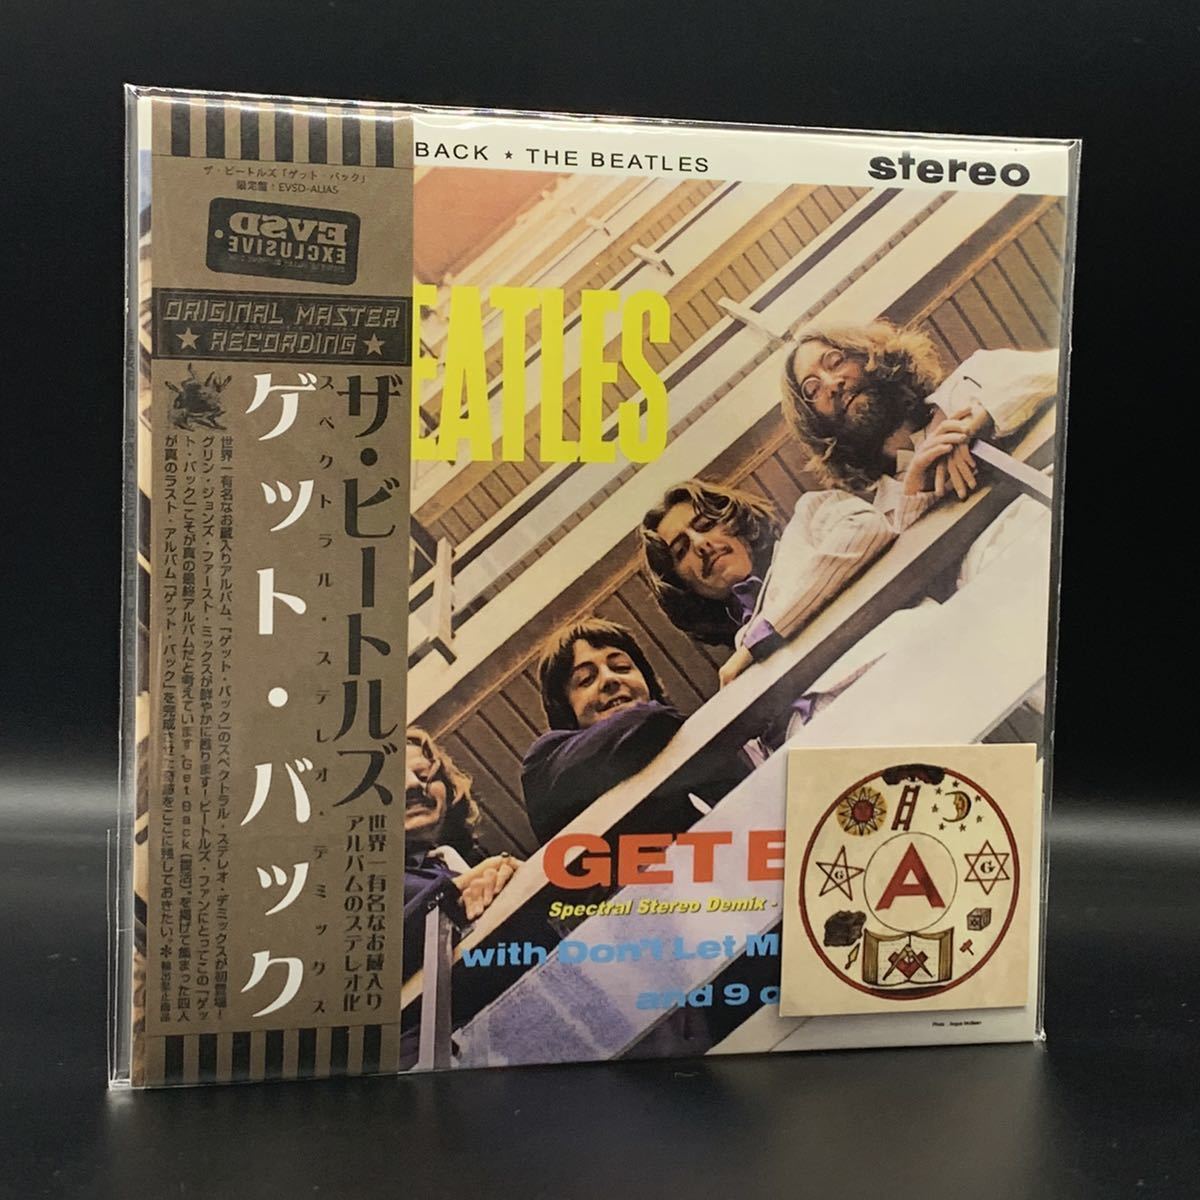 THE BEATLES : GET BACK STEREO DEMIX (CD) 1CD 工場プレス銀盤CD ■欧米輸入限定盤　■限定100セット 通常盤ジャケ違い！_画像1